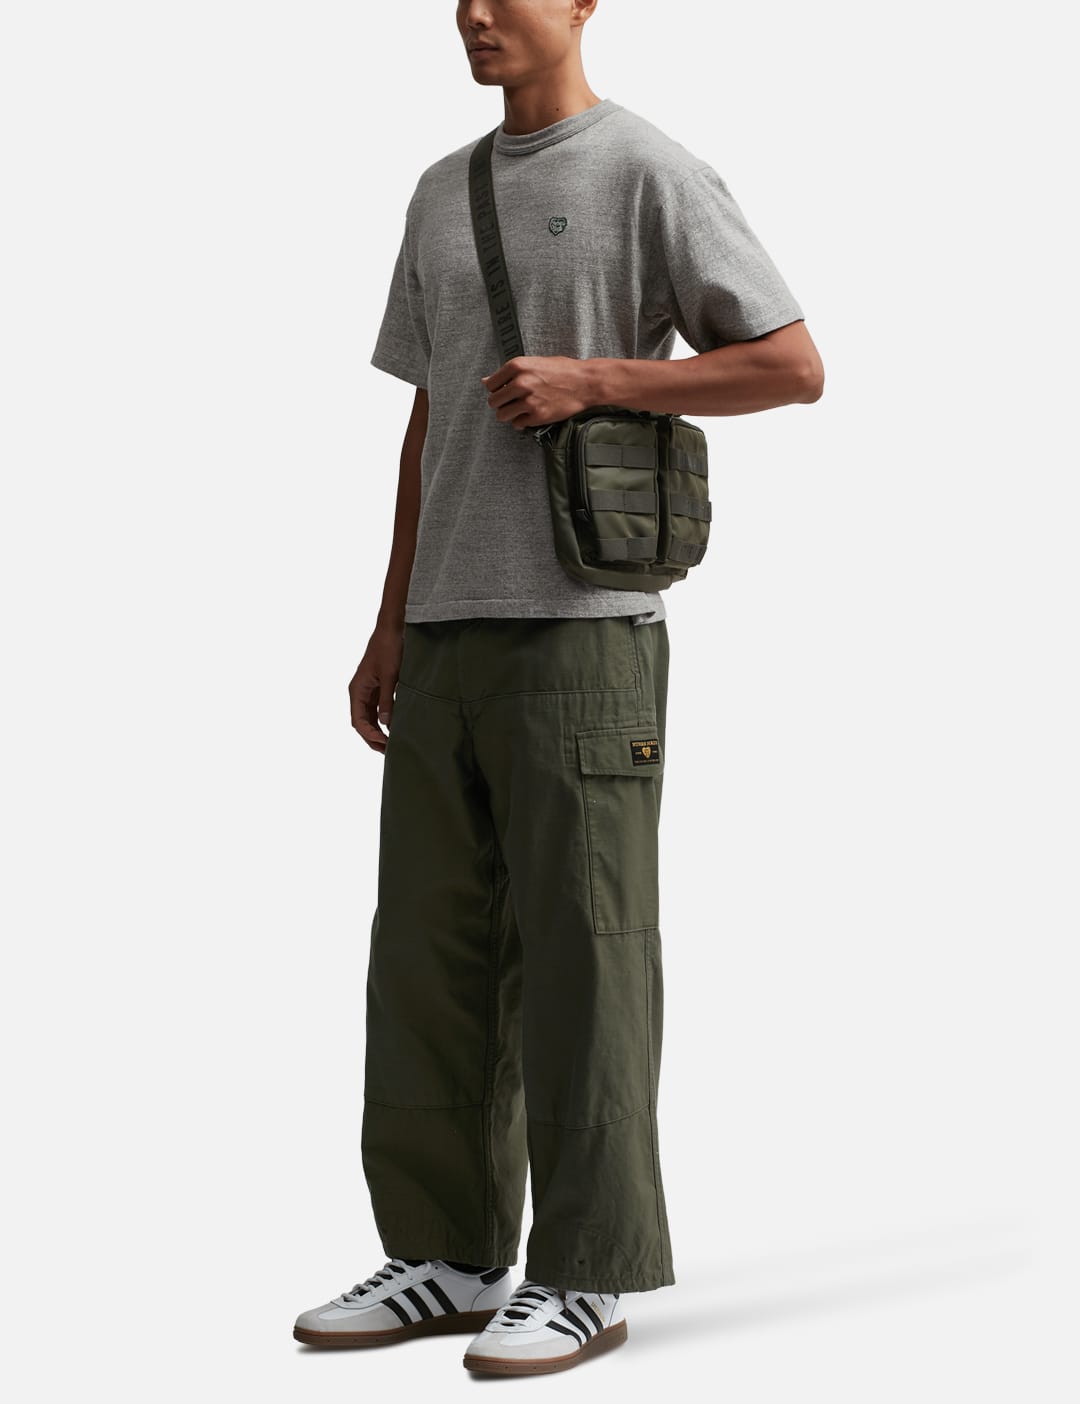 HUMAN MADE　MILITARY POUCH LARGE